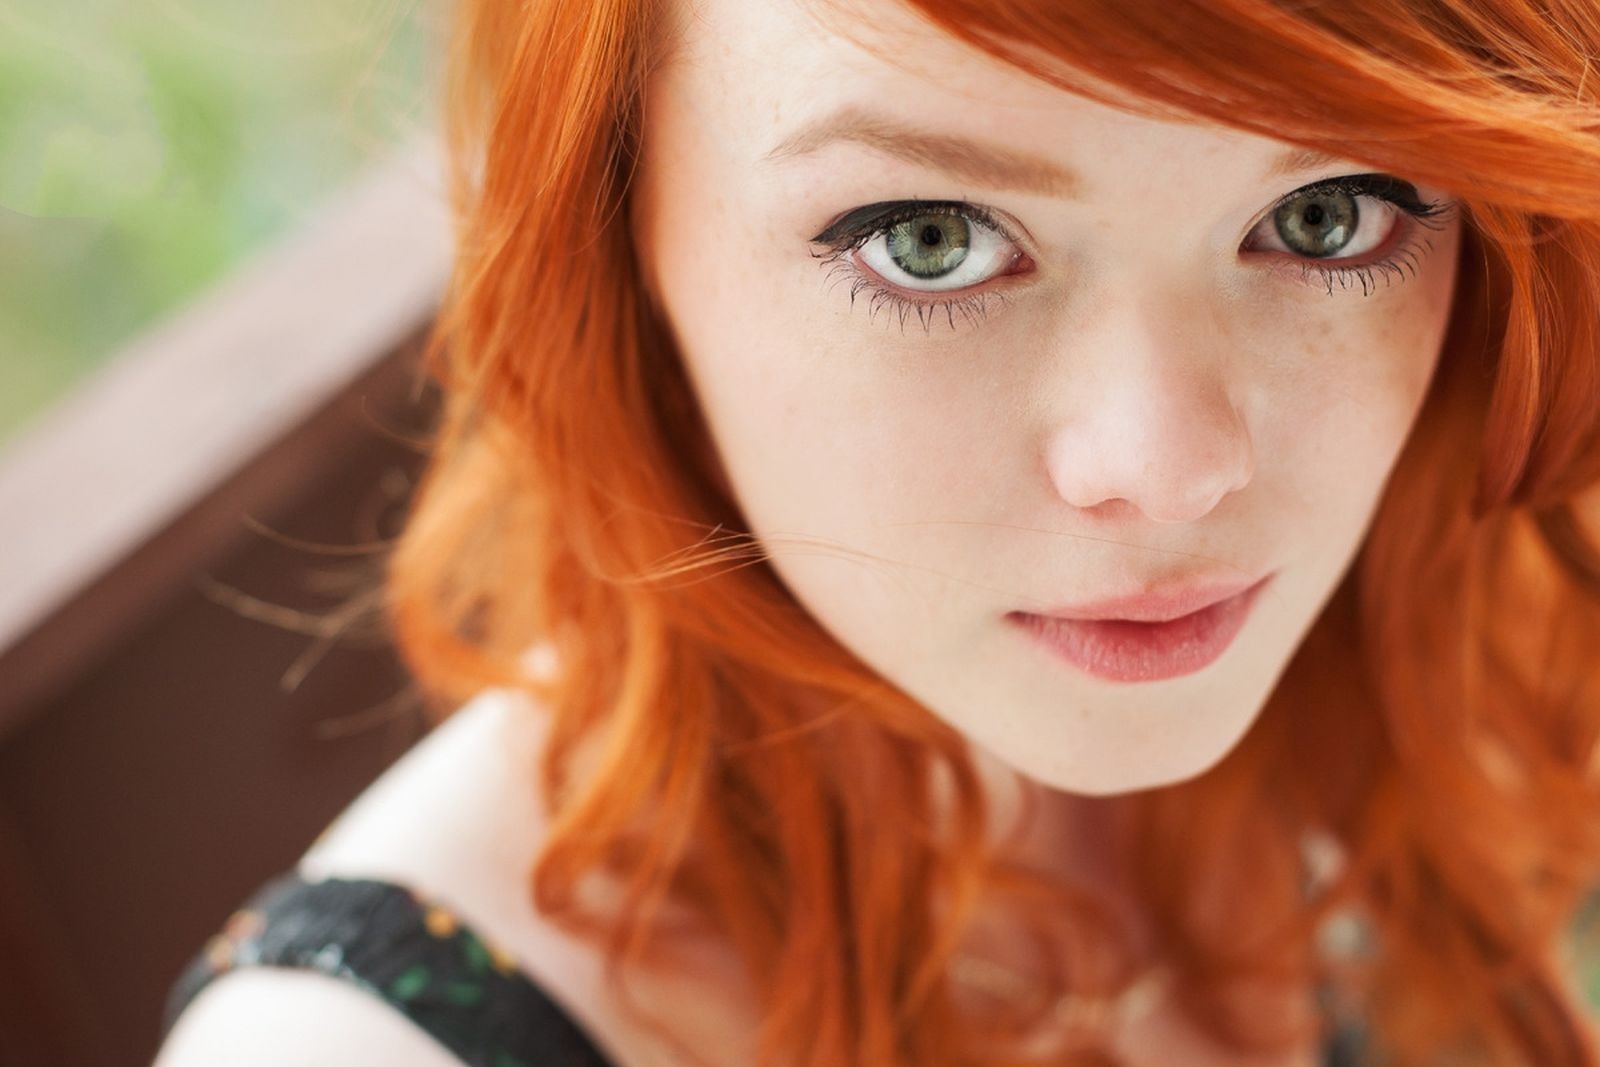 women redhead face freckles Wallpapers HD / Desktop and Mobile Backgrounds.